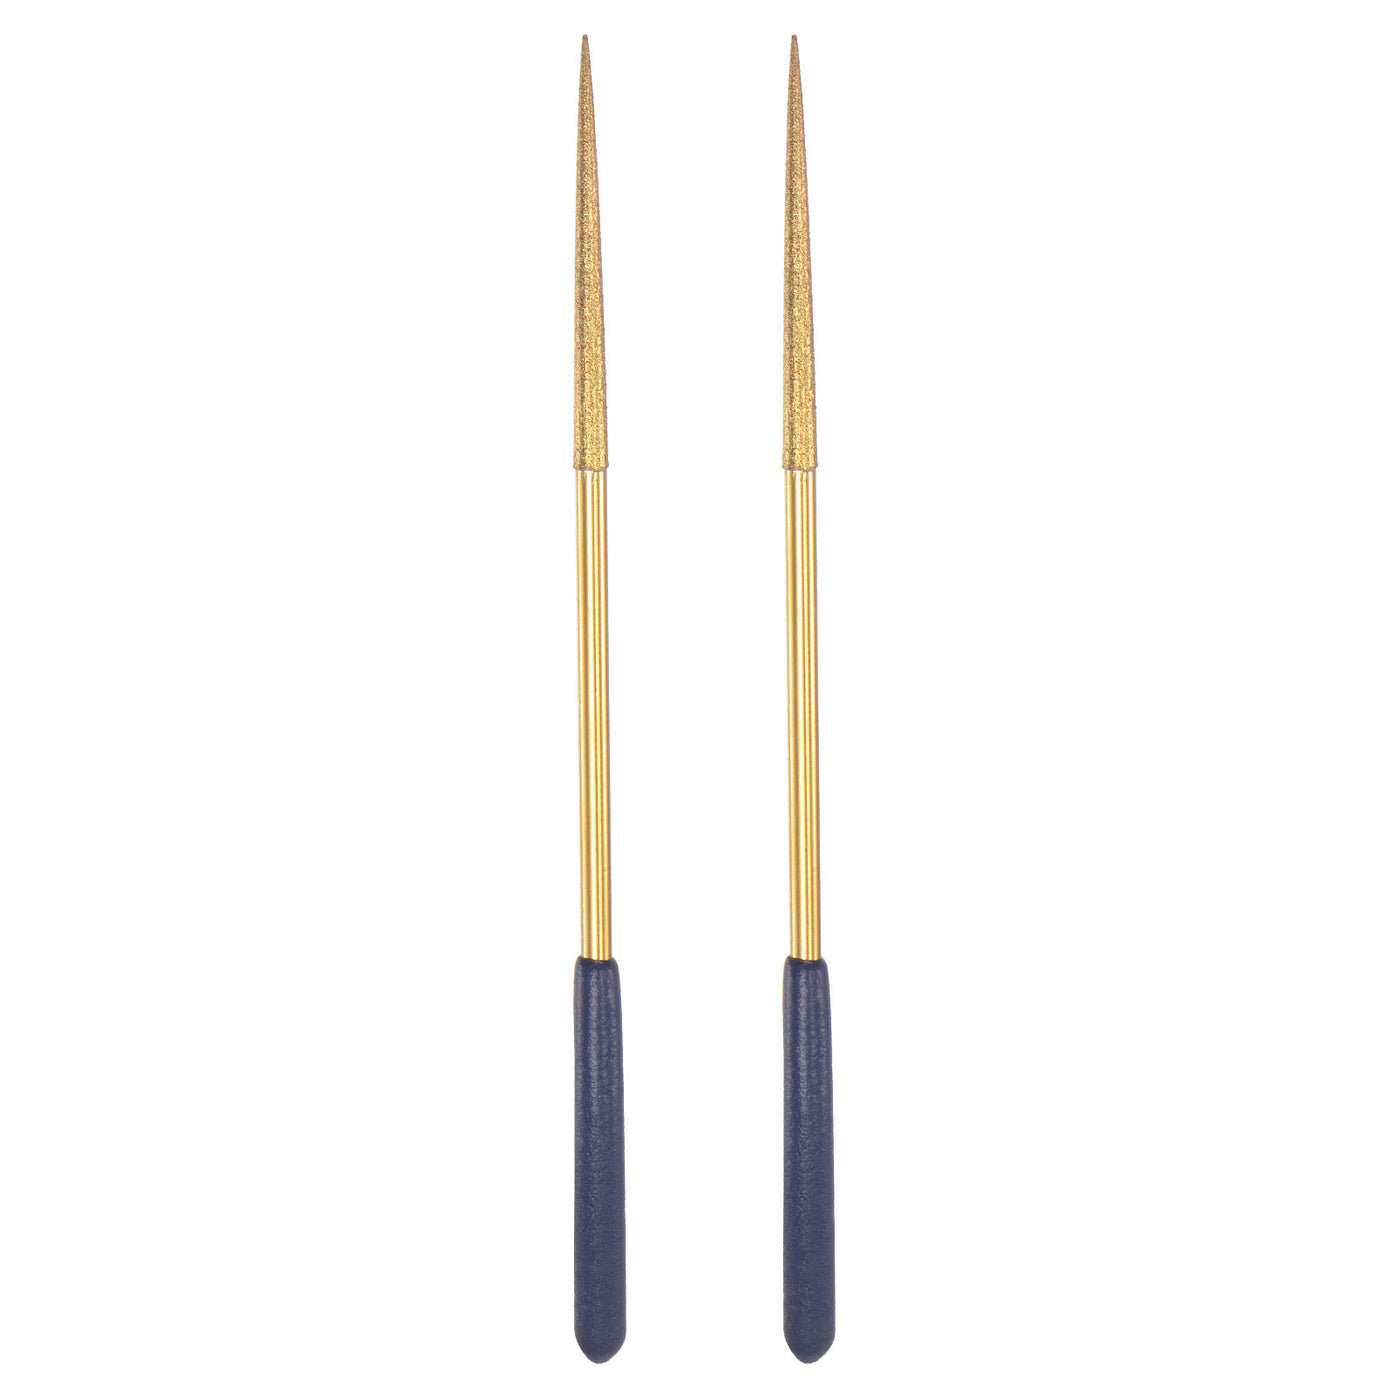 uxcell Uxcell 4mm x 160mm Titanium Coated Round Diamond Needle Files for Metal Wood Stone 2pcs